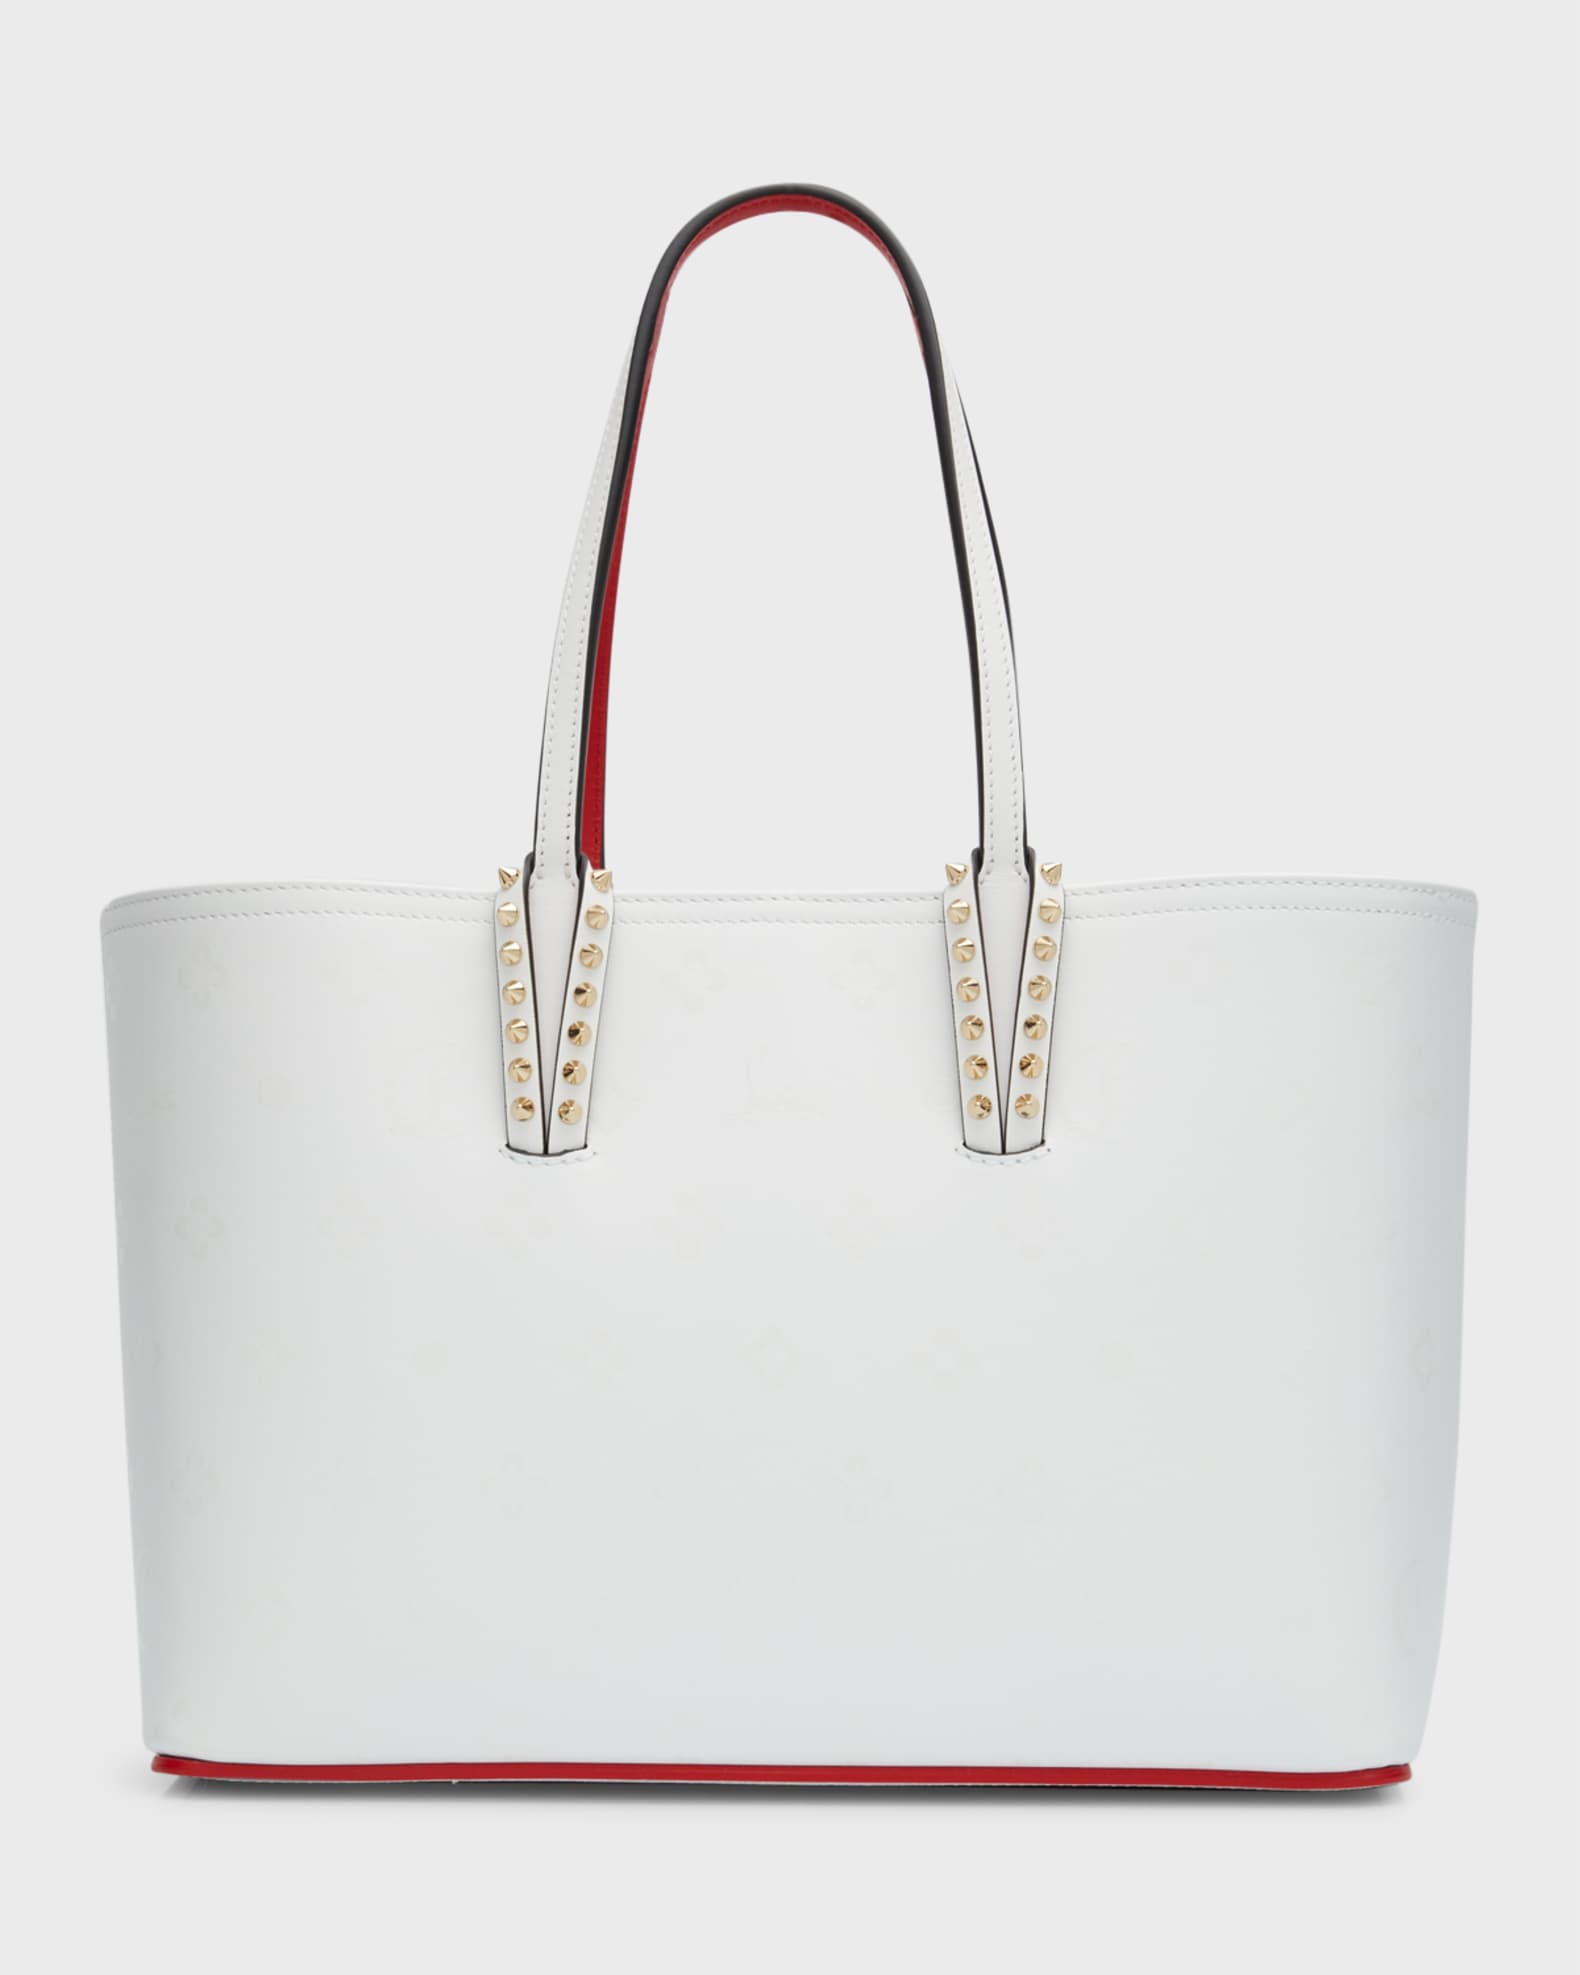 Christian Louboutin Cabata Small Tote in Loubinthesky Print Leather ...